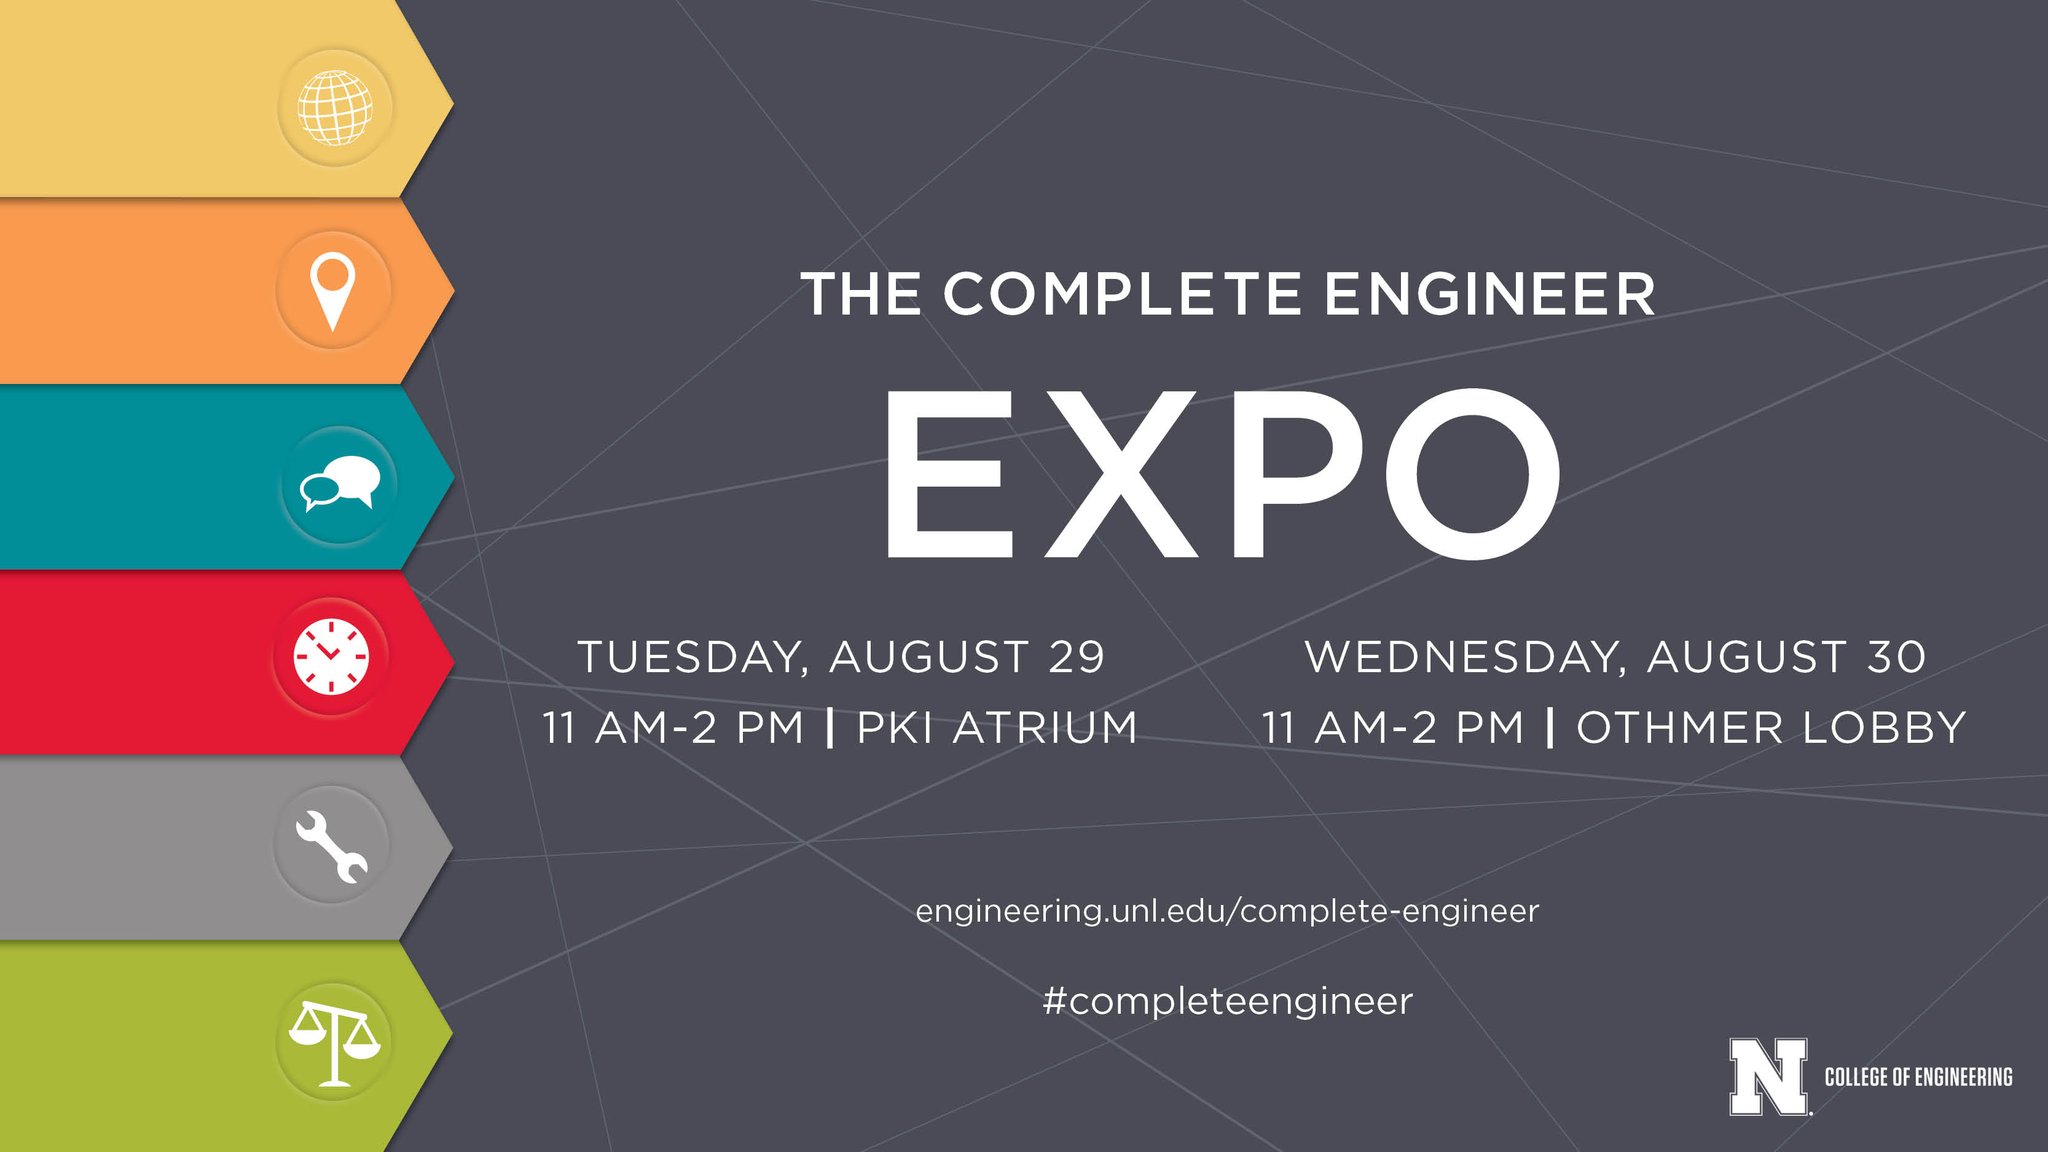 The Complete Engineer Expo